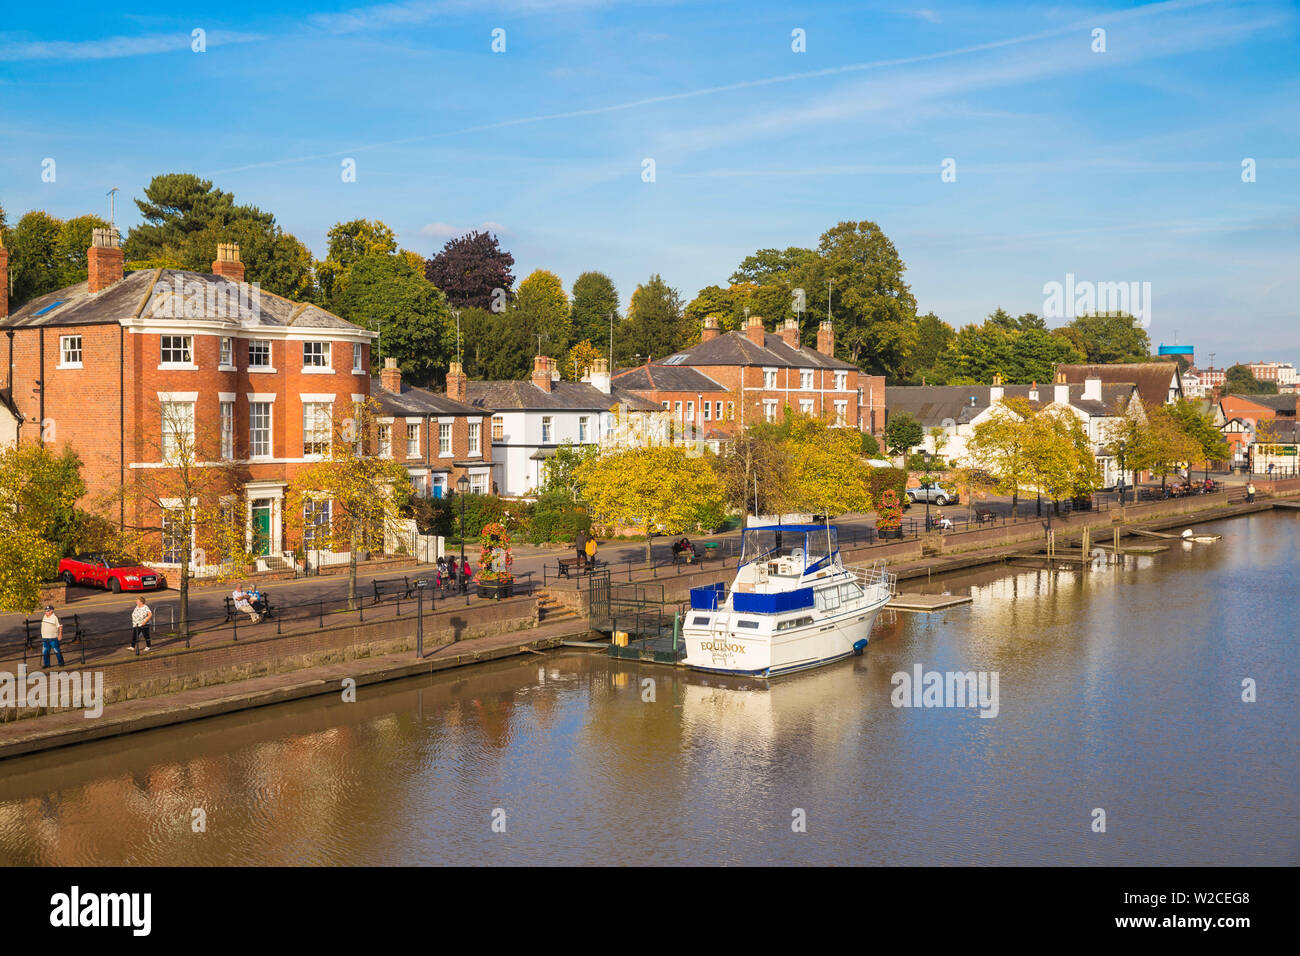 United Kingdom, England, Cheshire, Chester, View of the river Dee Stock Photo